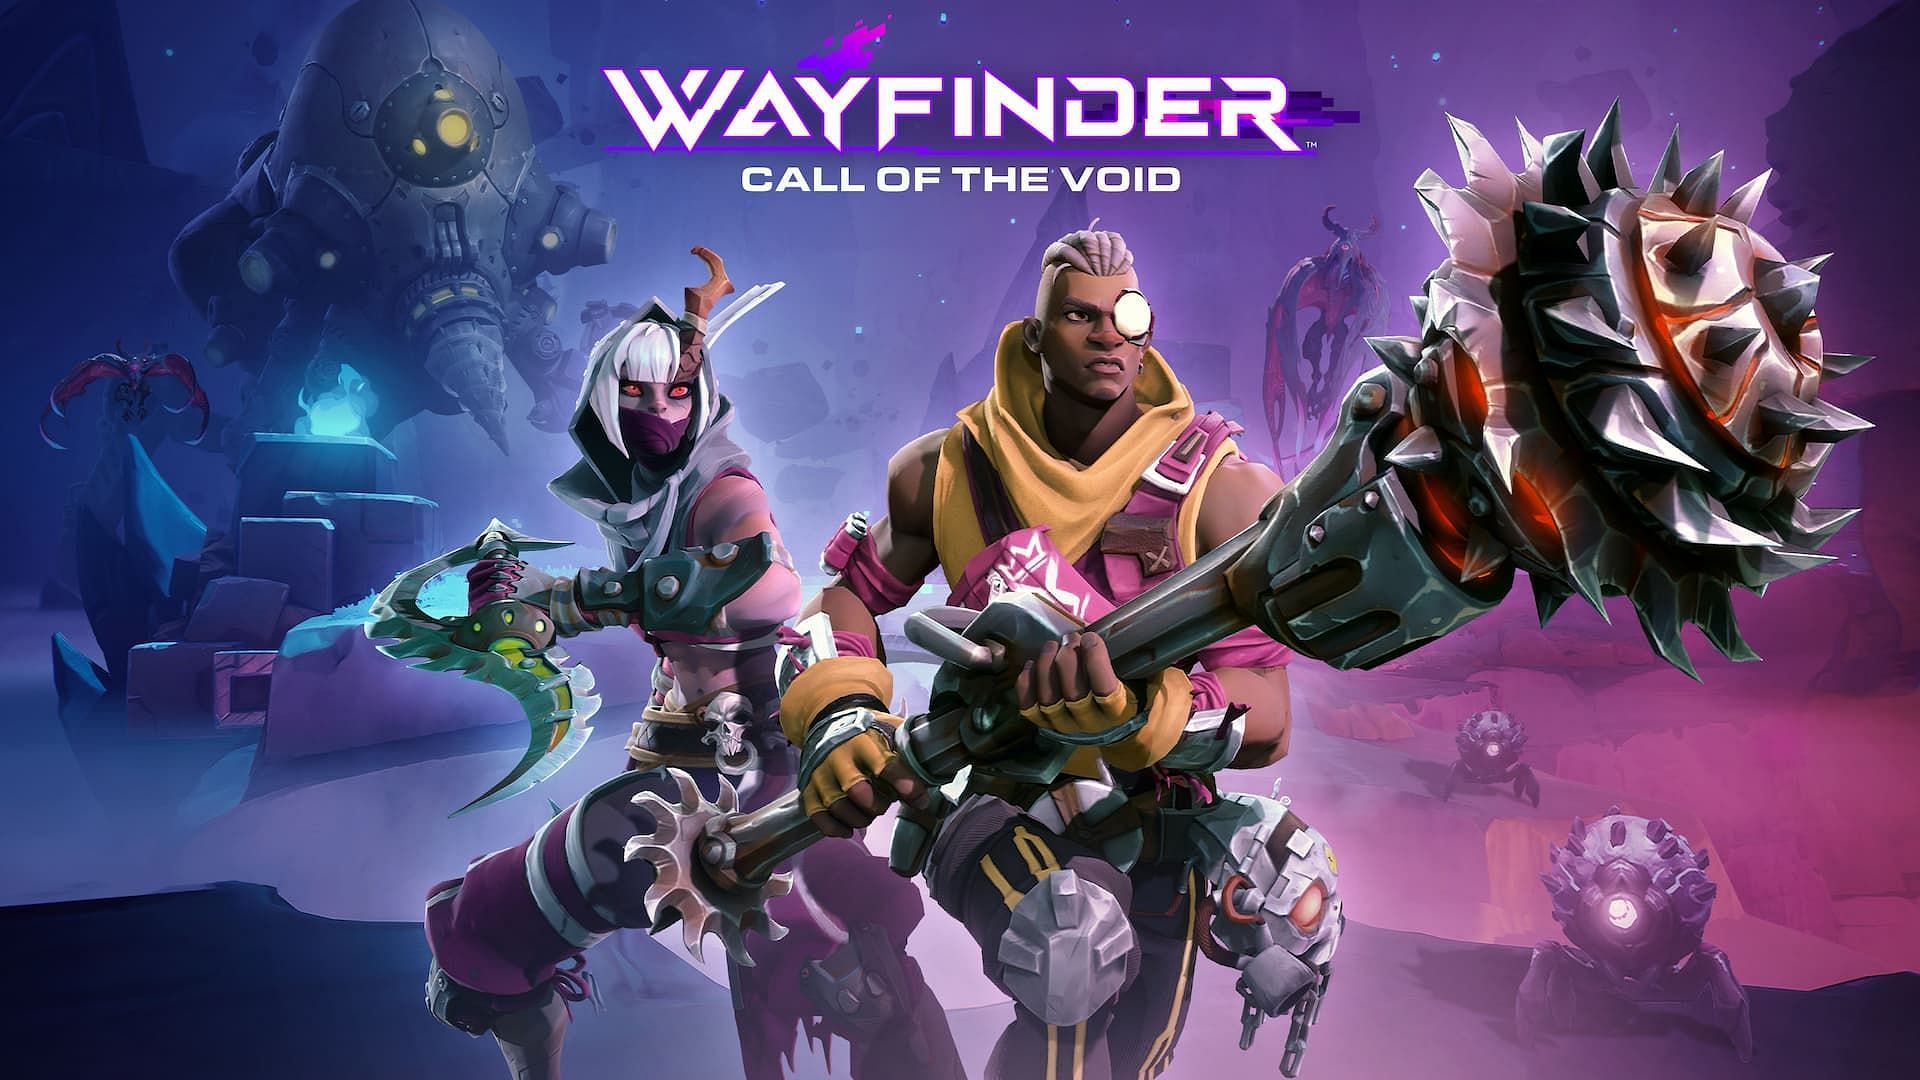 Wayfinder Call of The Void update official art, featuring the new weapon Juggernaut